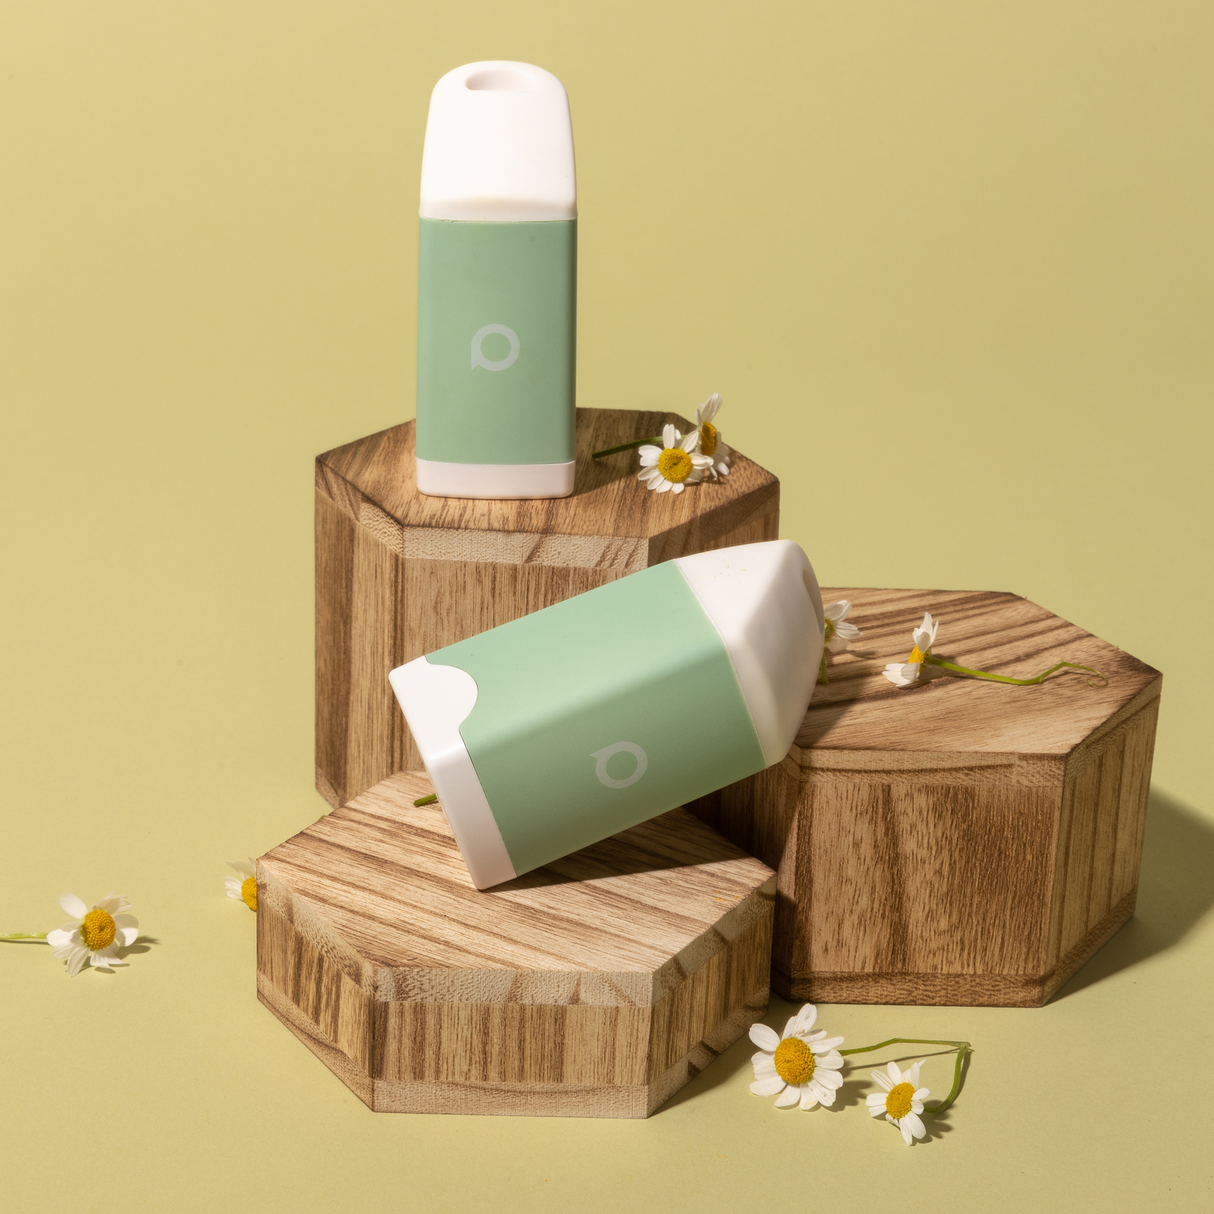 PHREND by Philter Labs - Portable Personal Smoke Filter on Wooden Blocks with Flowers